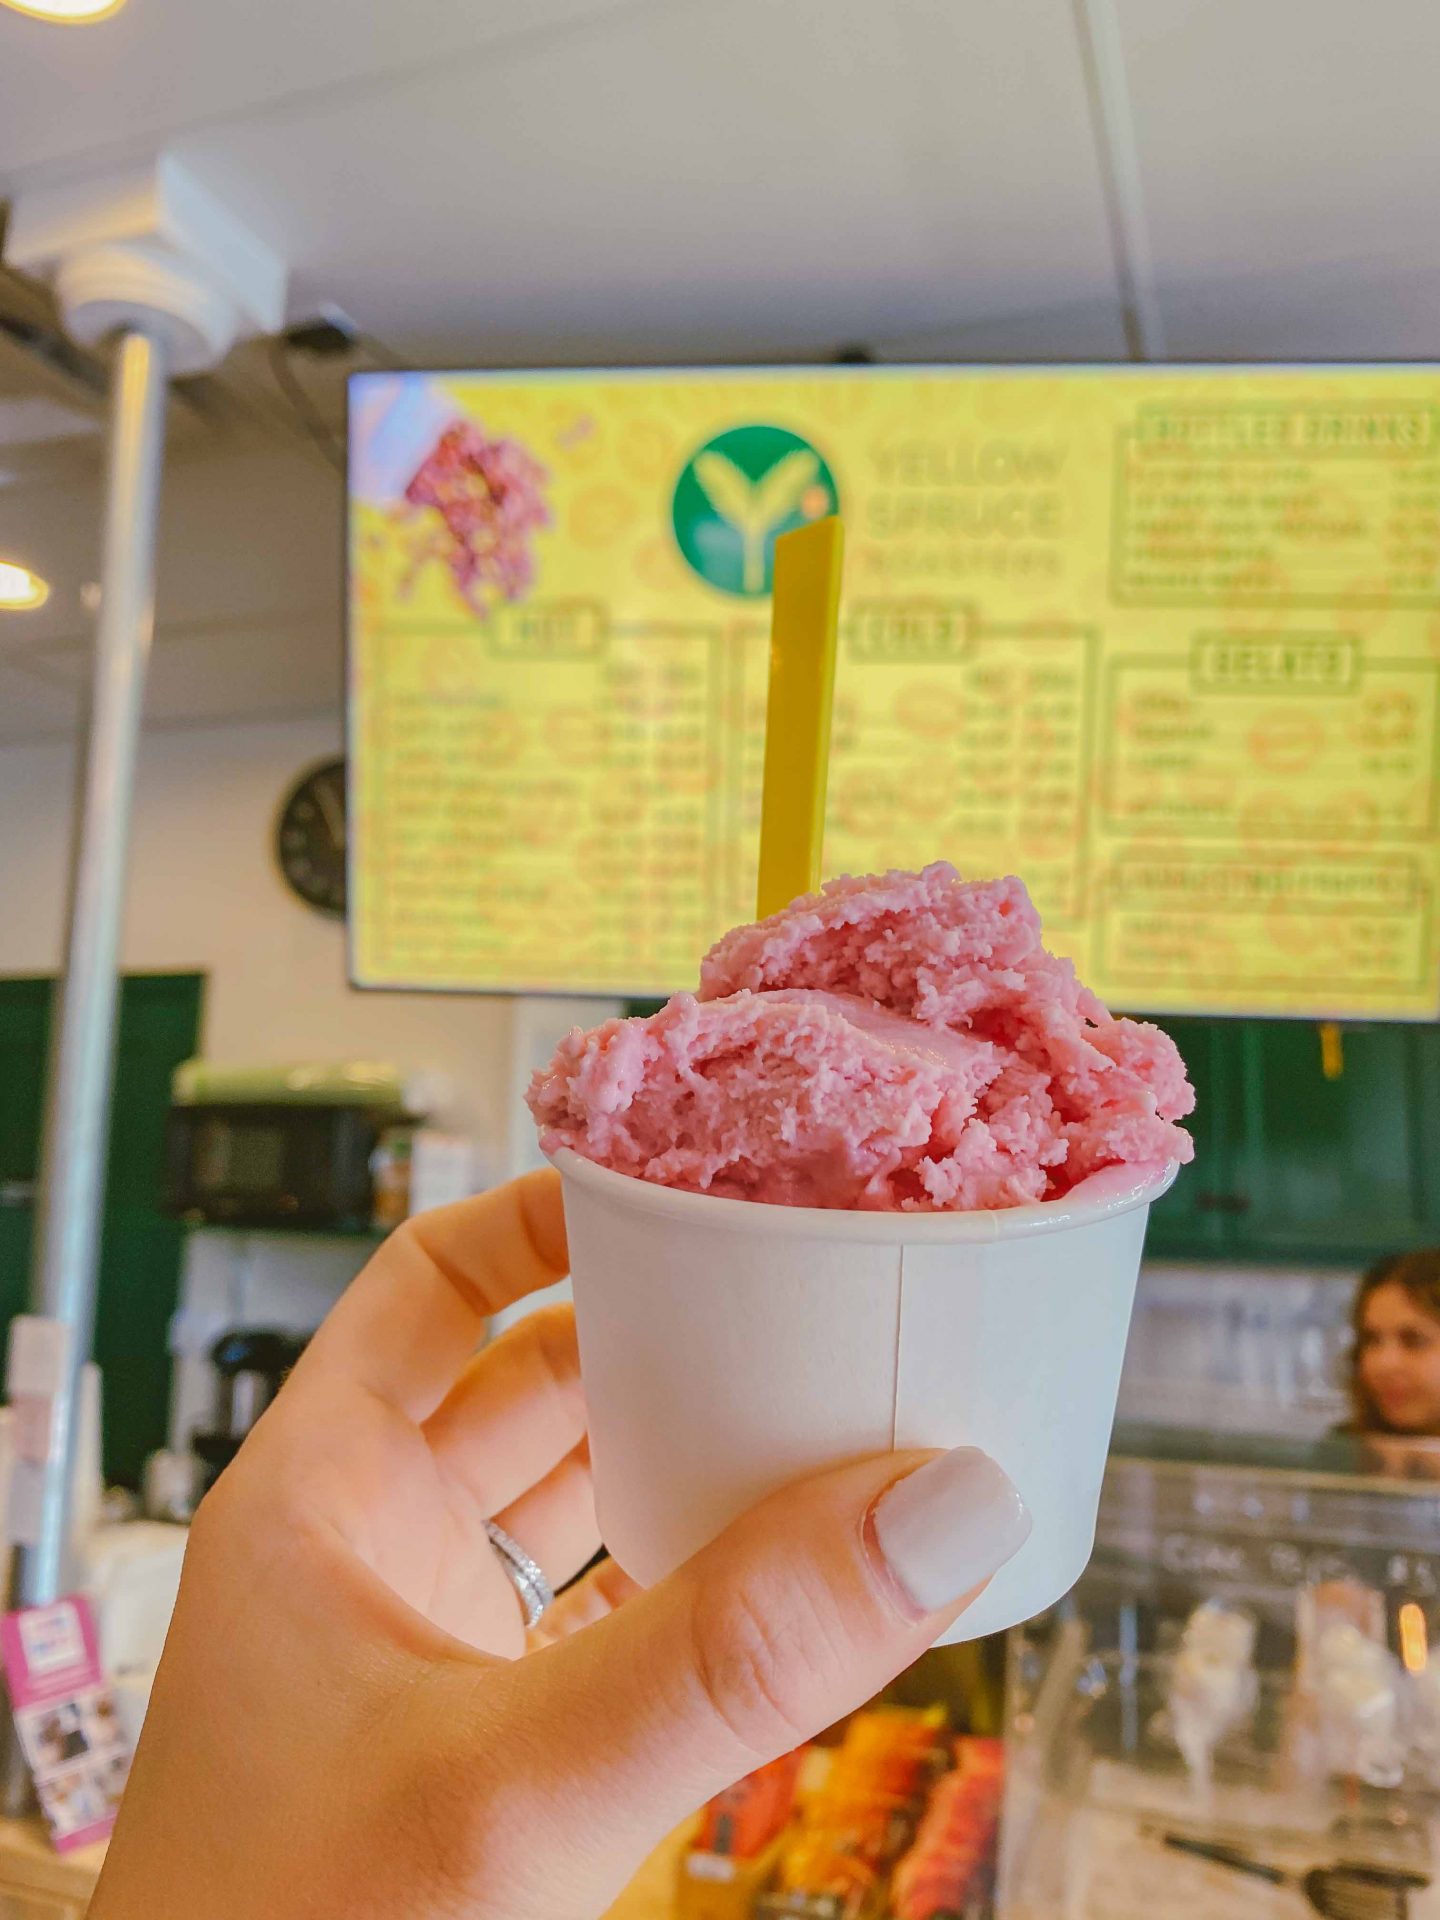 scottsdale arizona gelato tour, old town scottsdale tour, joyrideaz, travel guide to scottsdale Arizona, what to do in scottsdale, honeymoon, bachelorette, plan a trip to scottsdale, dessert, restaurants, everything to do in scottsdale, yellow spruce roosters, coffee and gelato shop